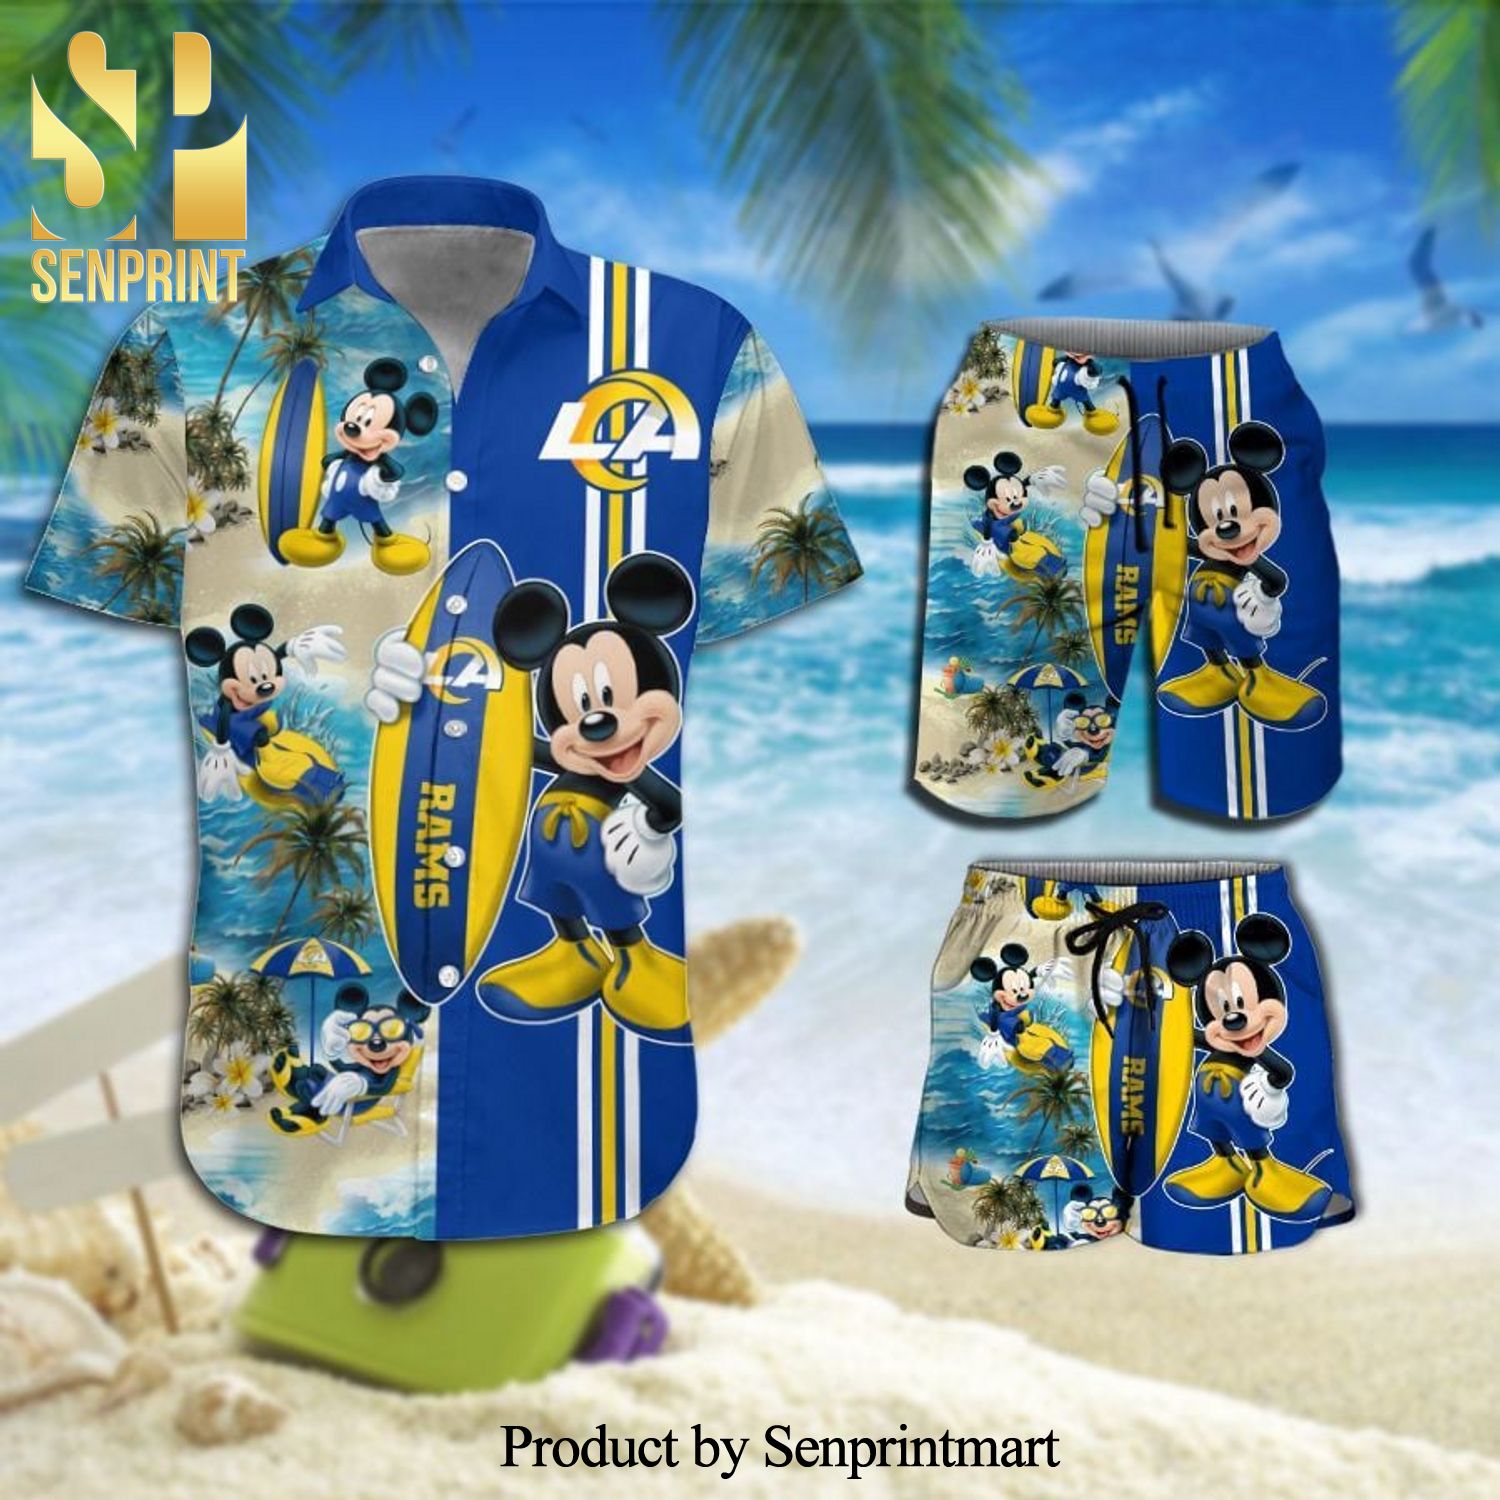 Los Angeles Rams Mickey Mouse Surfing On The Beach Full Printing Combo Hawaiian Shirt And Beach Shorts – Blue